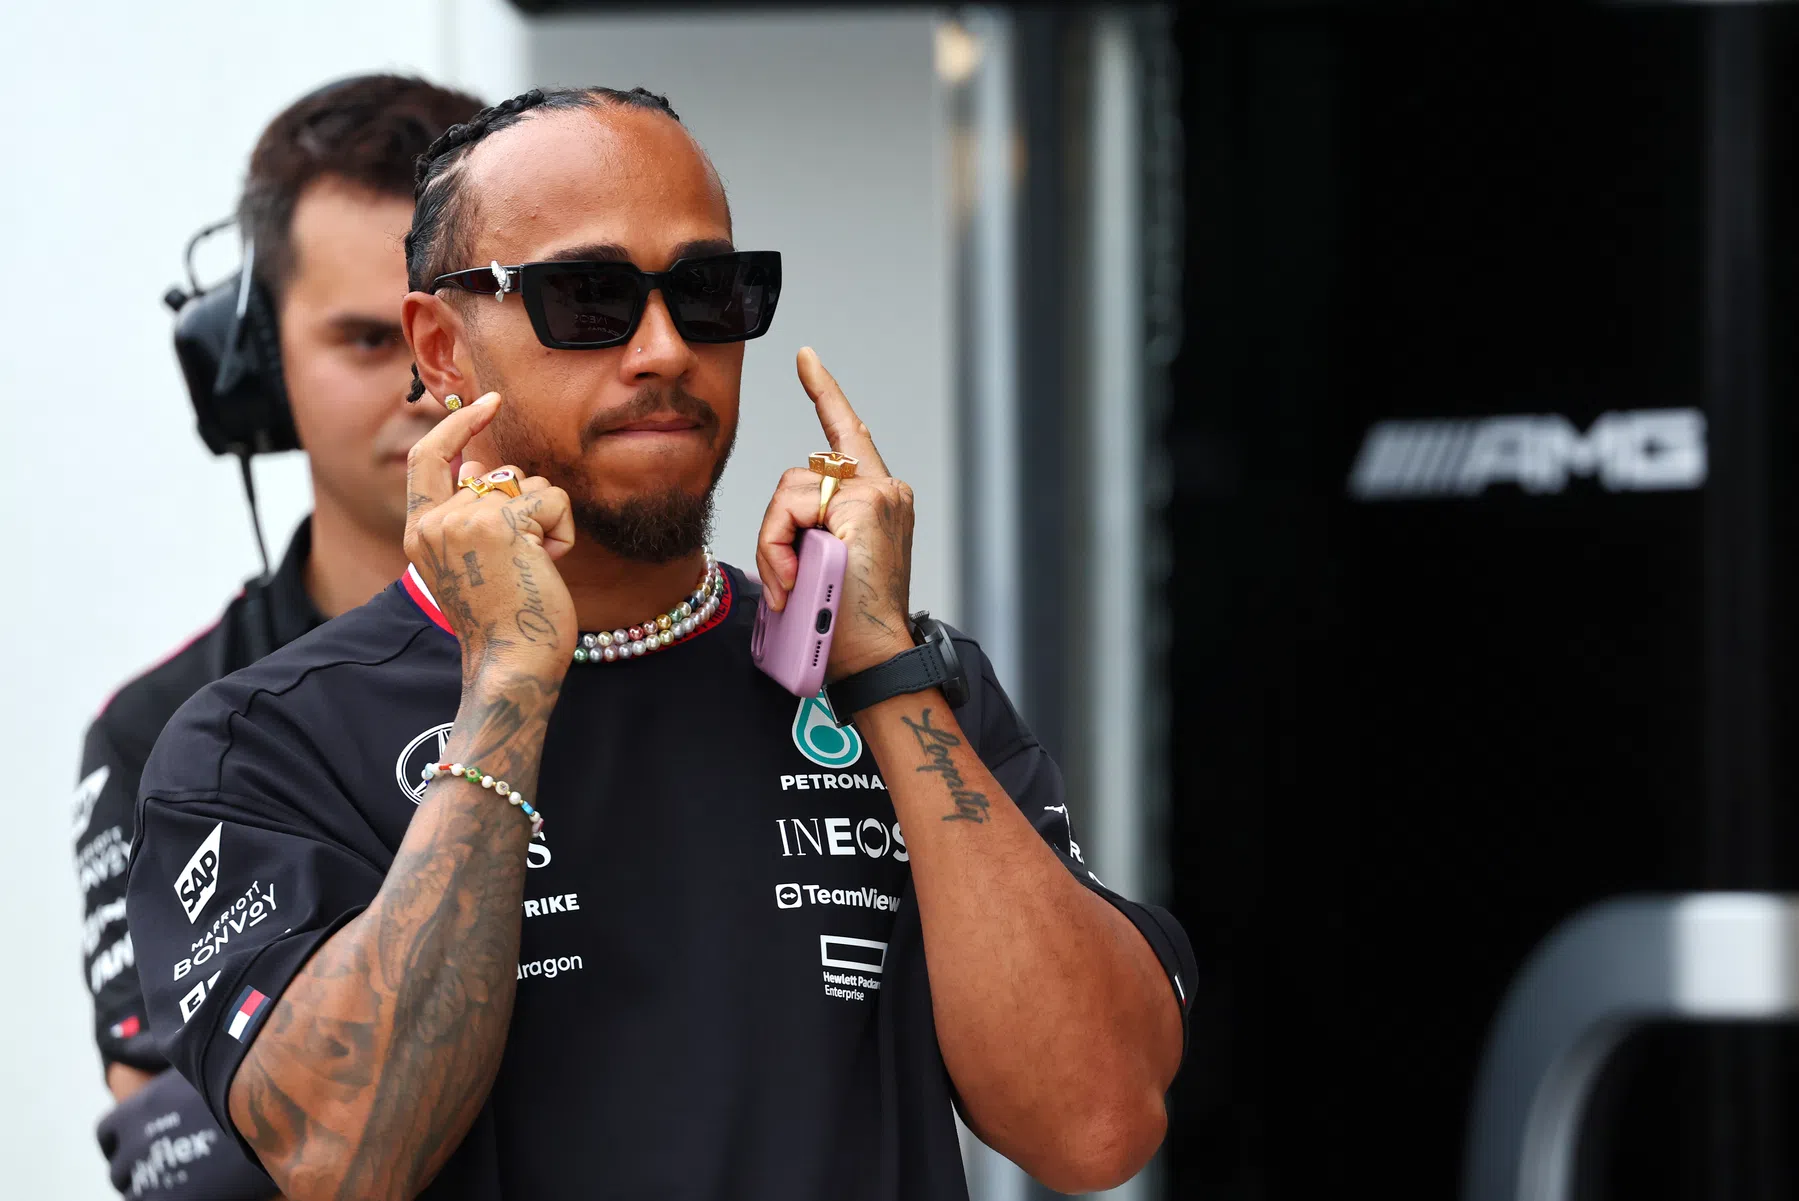 drivers talk about their superstitions in sport, hamilton and stroll